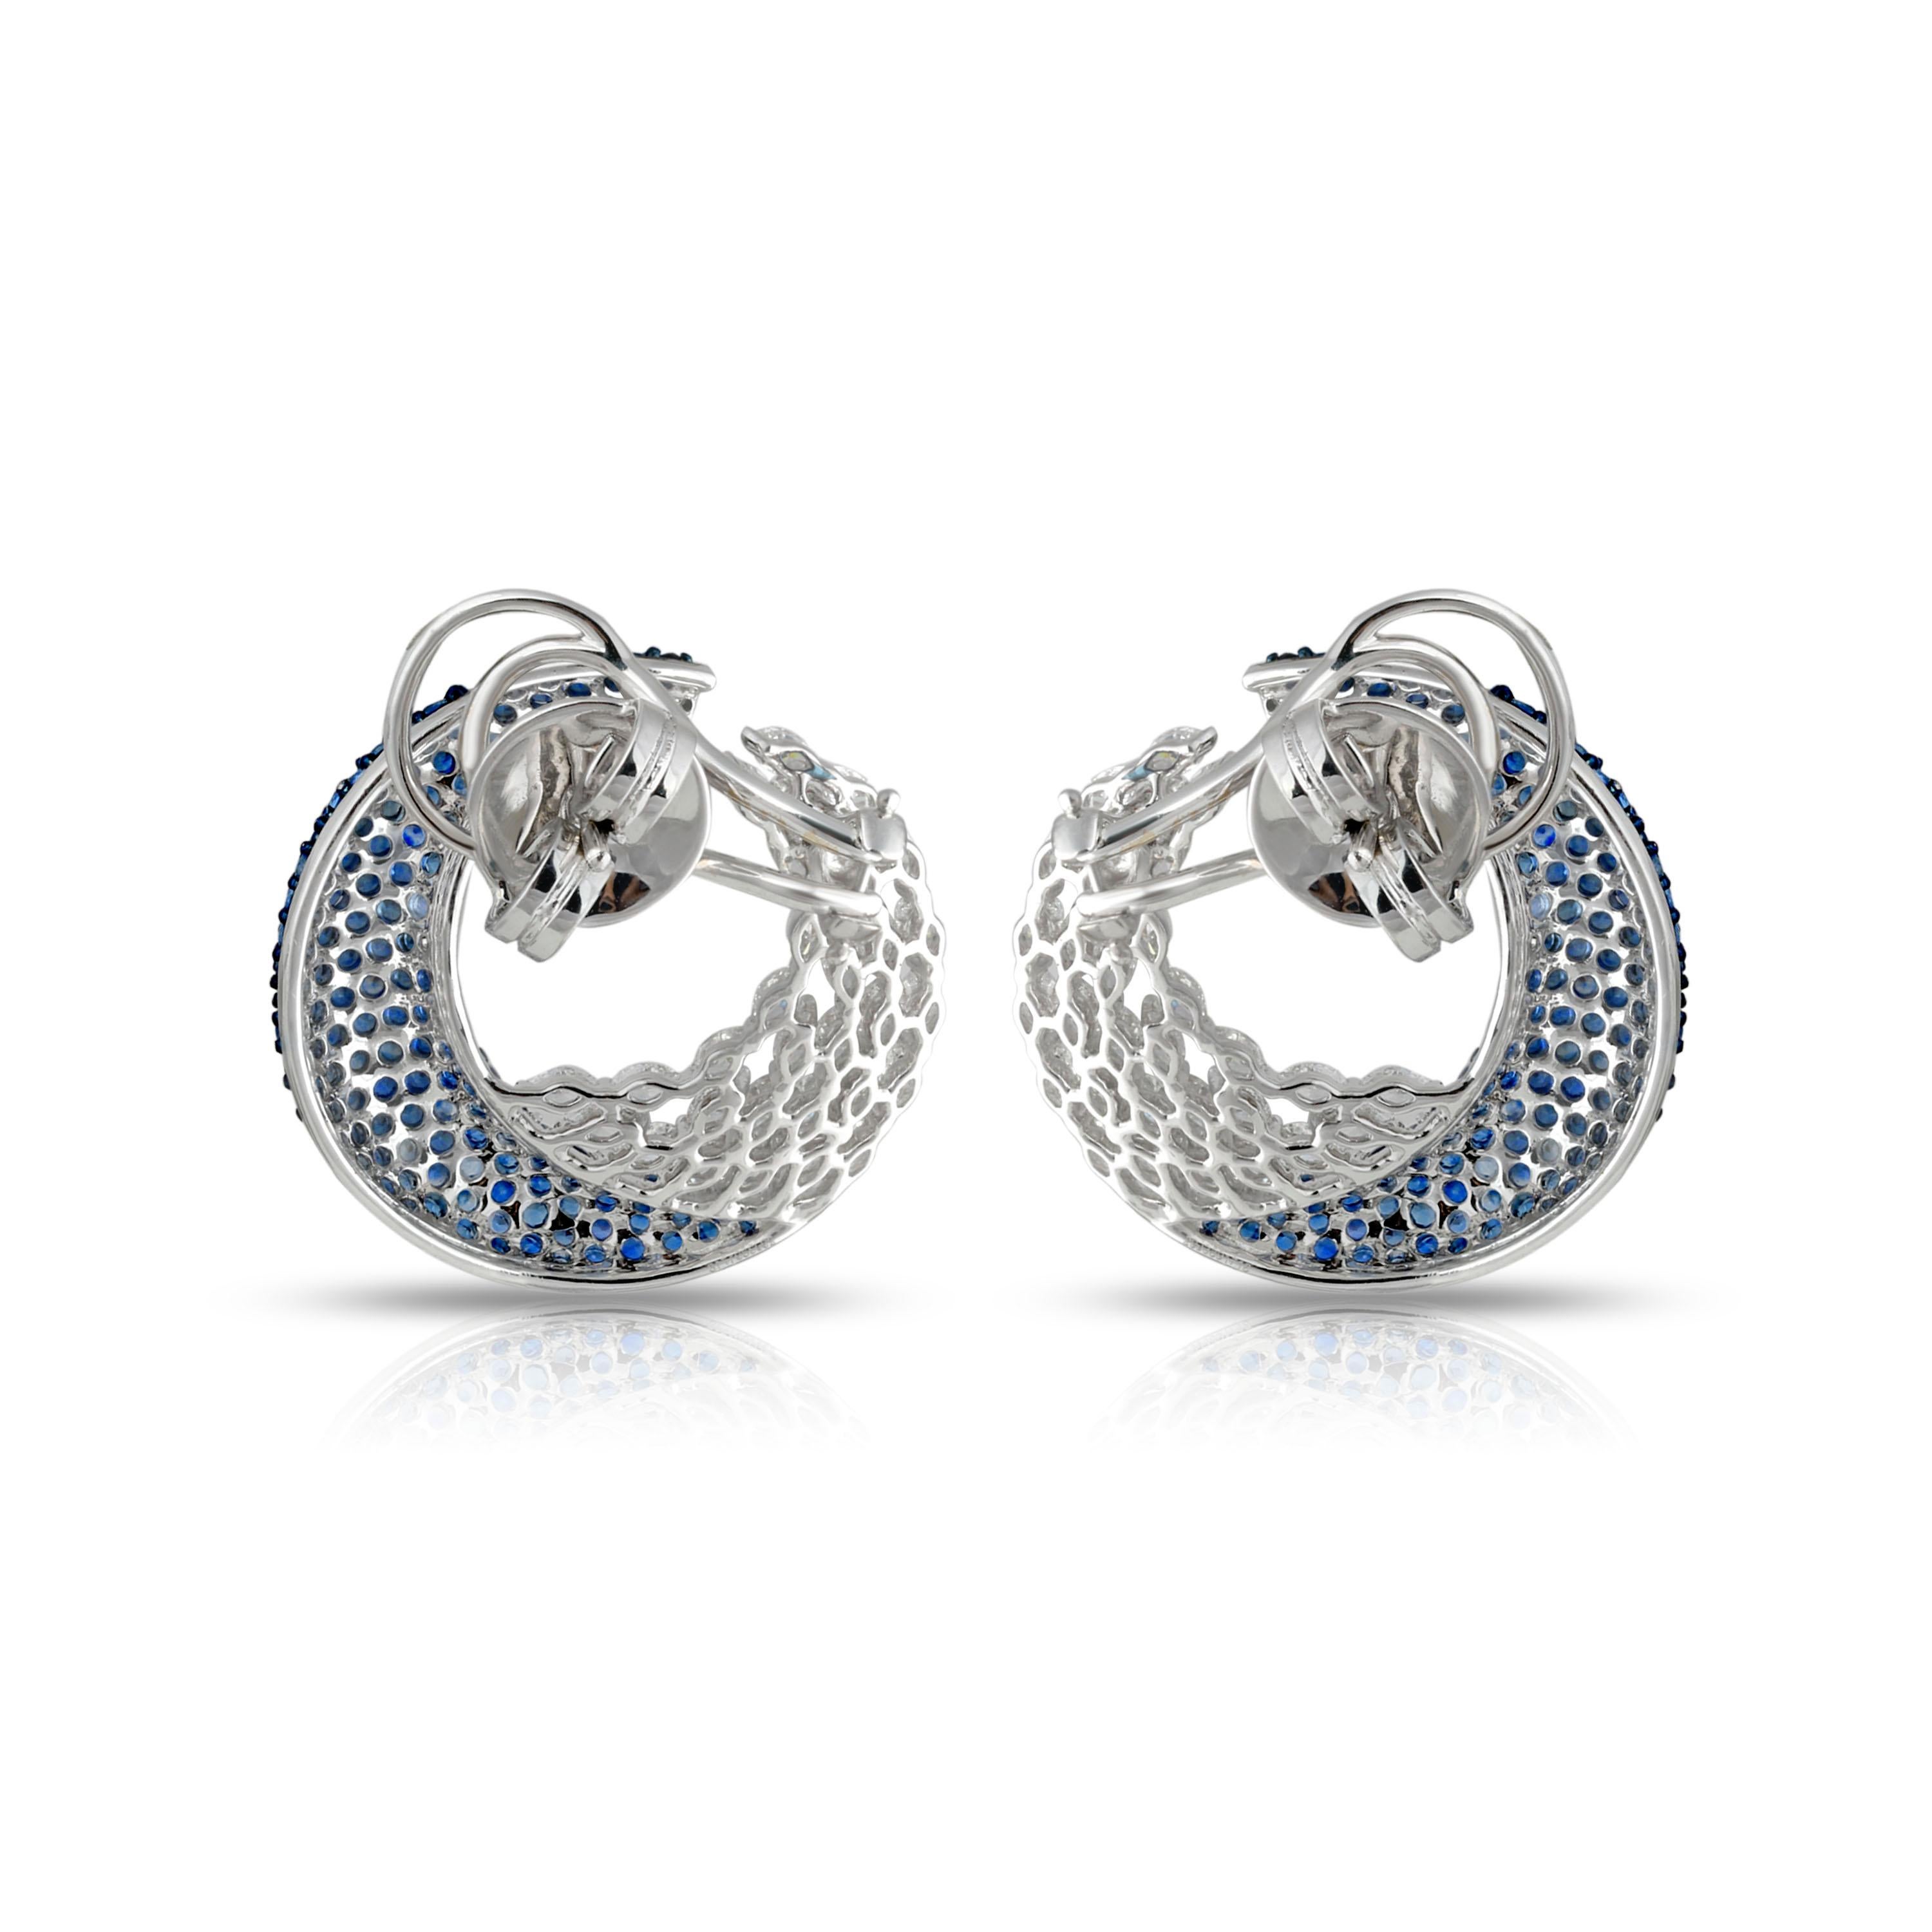 Marquise Cut Studio Rêves Marquise Diamonds and Blue Sapphire Earrings in 18 Karat Gold